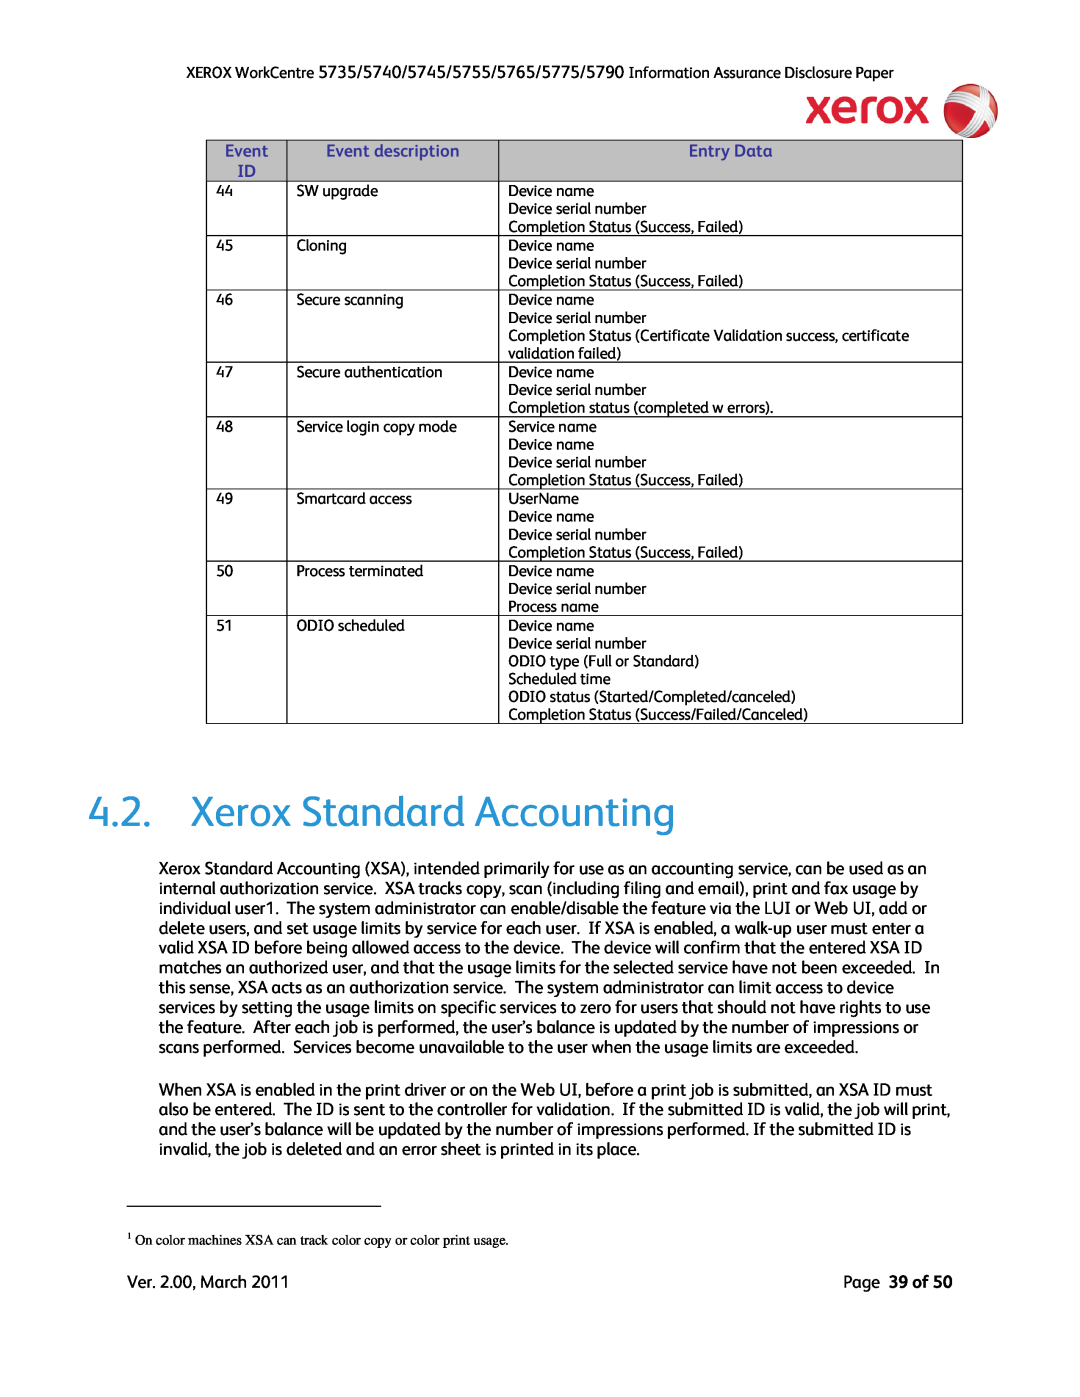 Xerox 5740, 5790, 5775, 5745, 5735, 5755 manual Xerox Standard Accounting, Event description, Entry Data, Page 39 of 